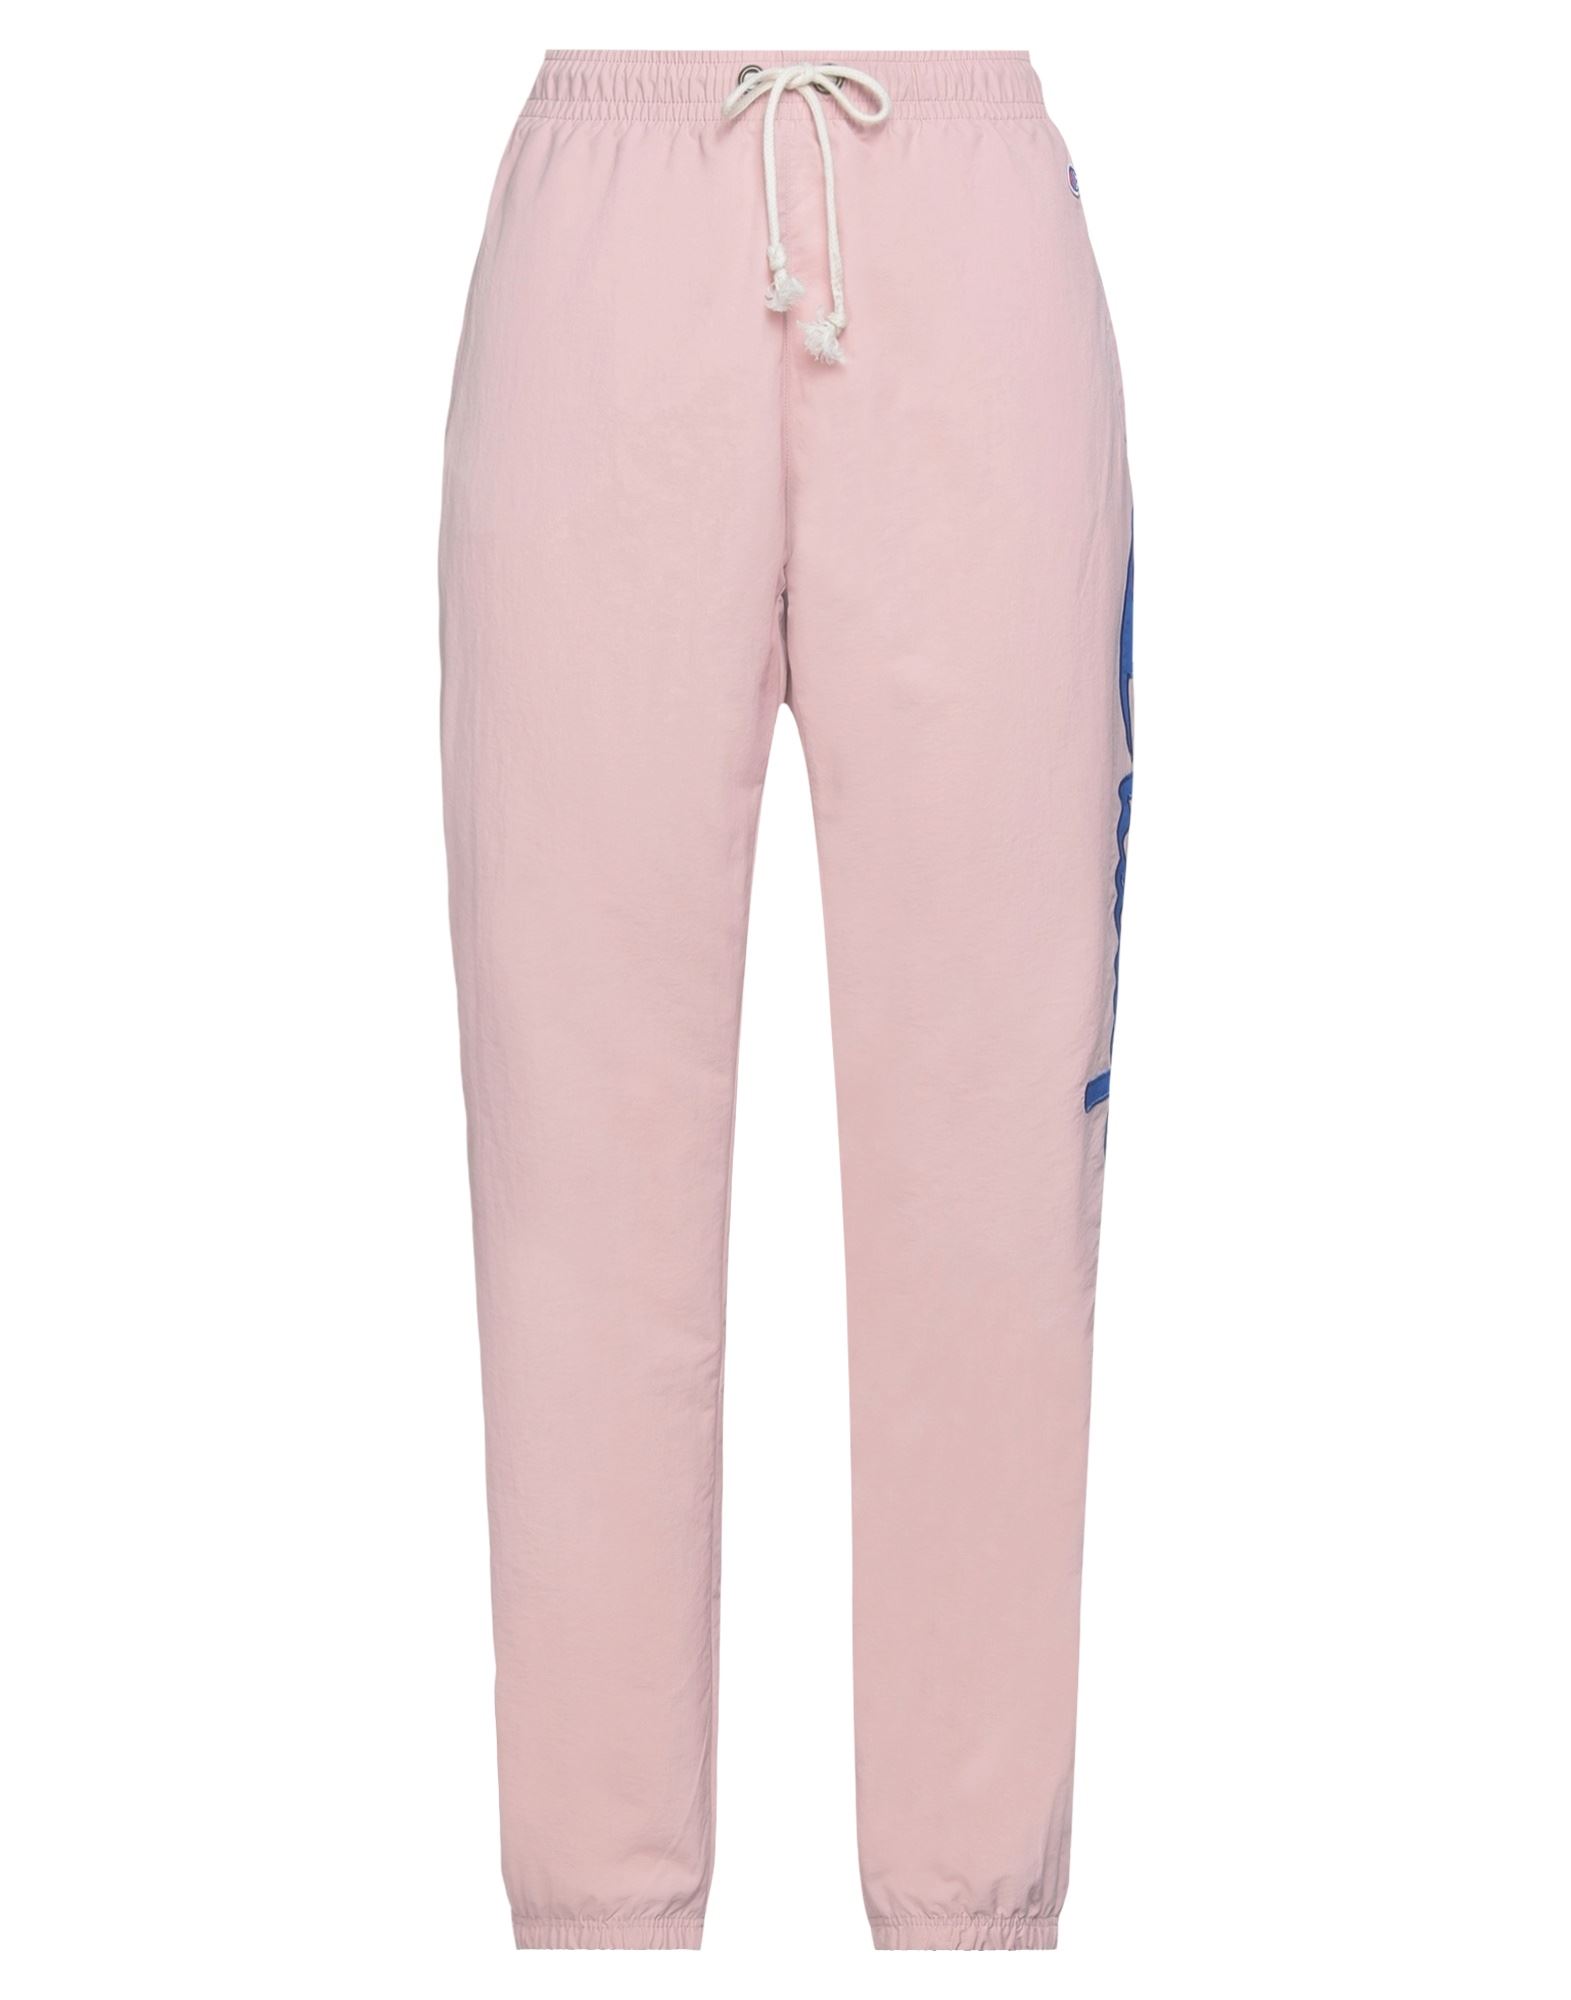 Champion Pants In Pink